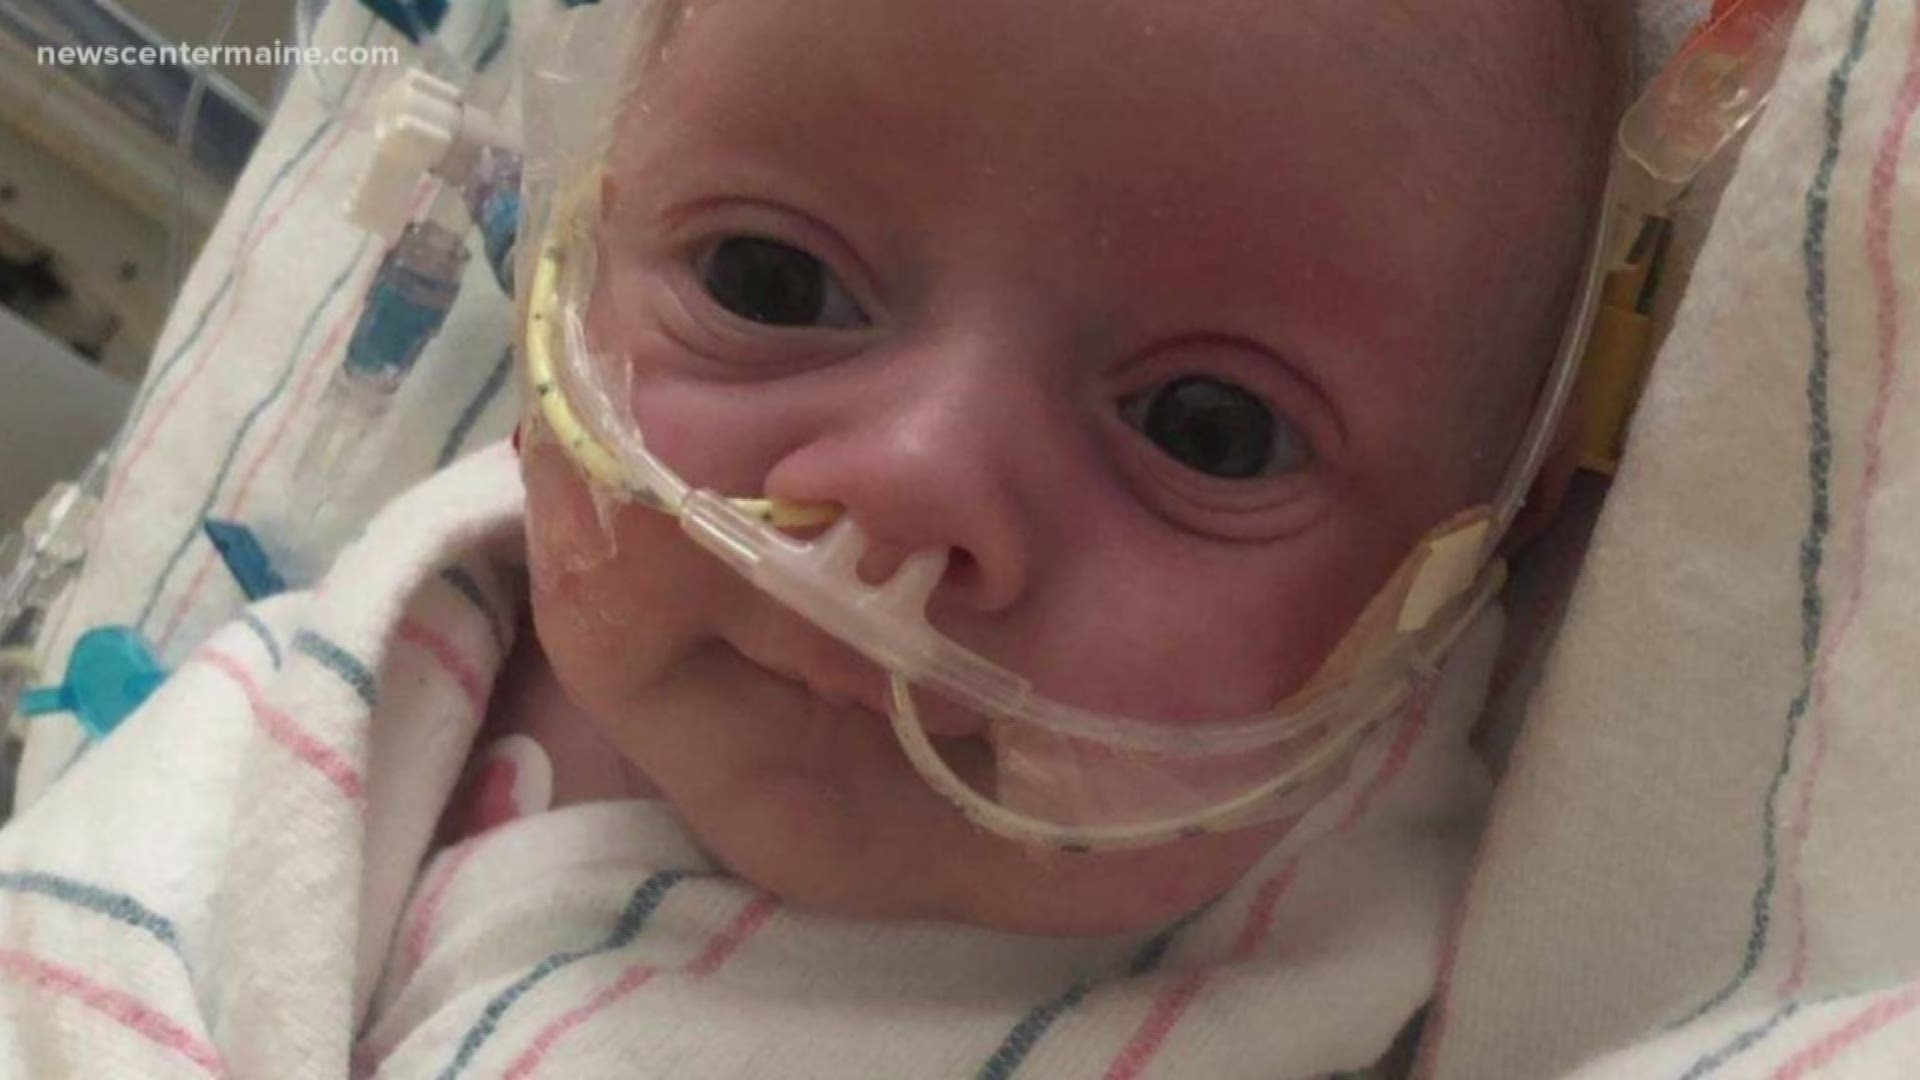 Baby Carson is recovering from a heart transplant after his brother died from the same condition he has nearly two years earlier.